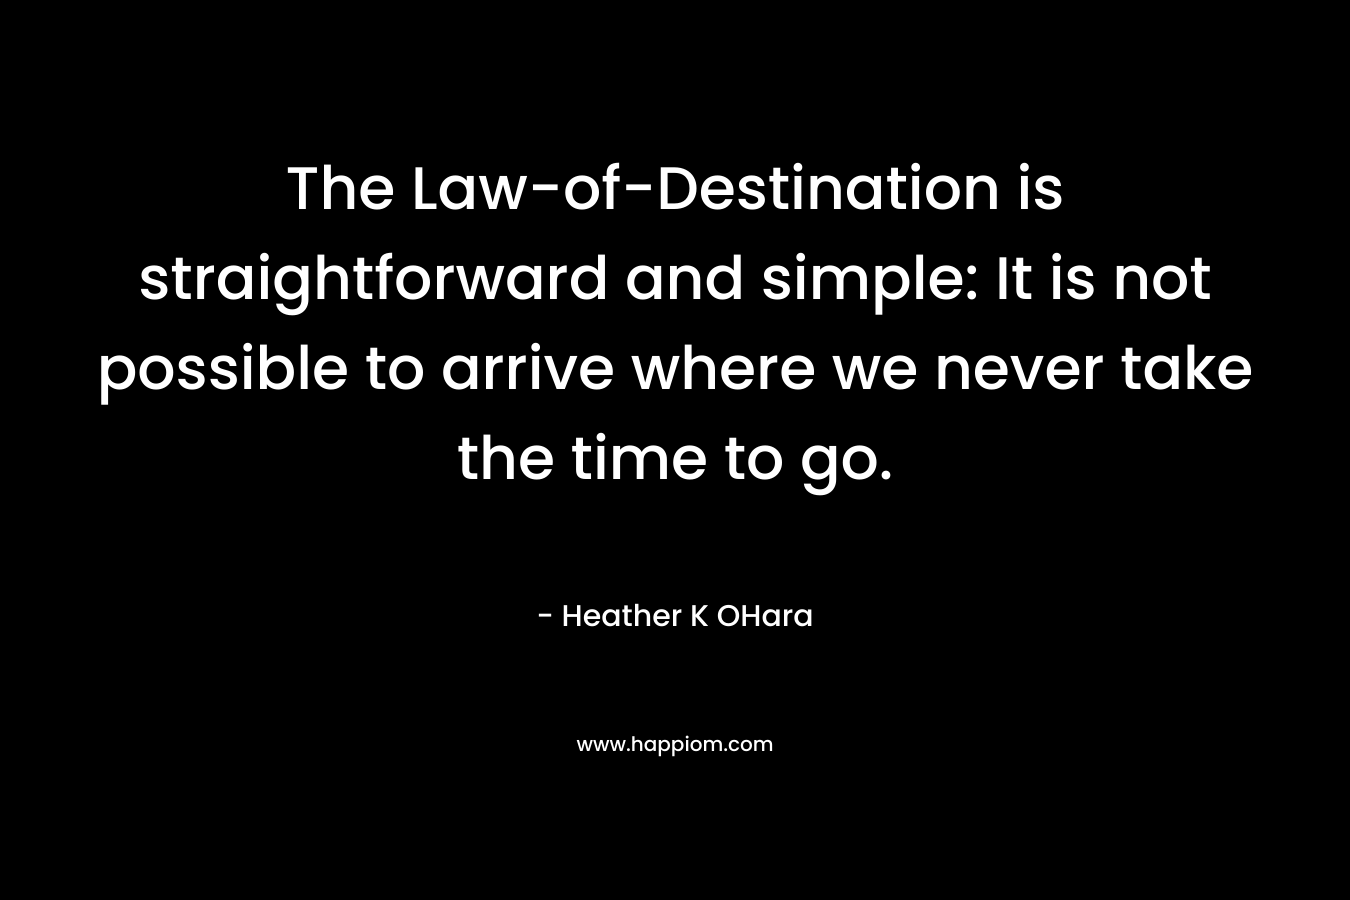 The Law-of-Destination is straightforward and simple: It is not possible to arrive where we never take the time to go. – Heather K OHara